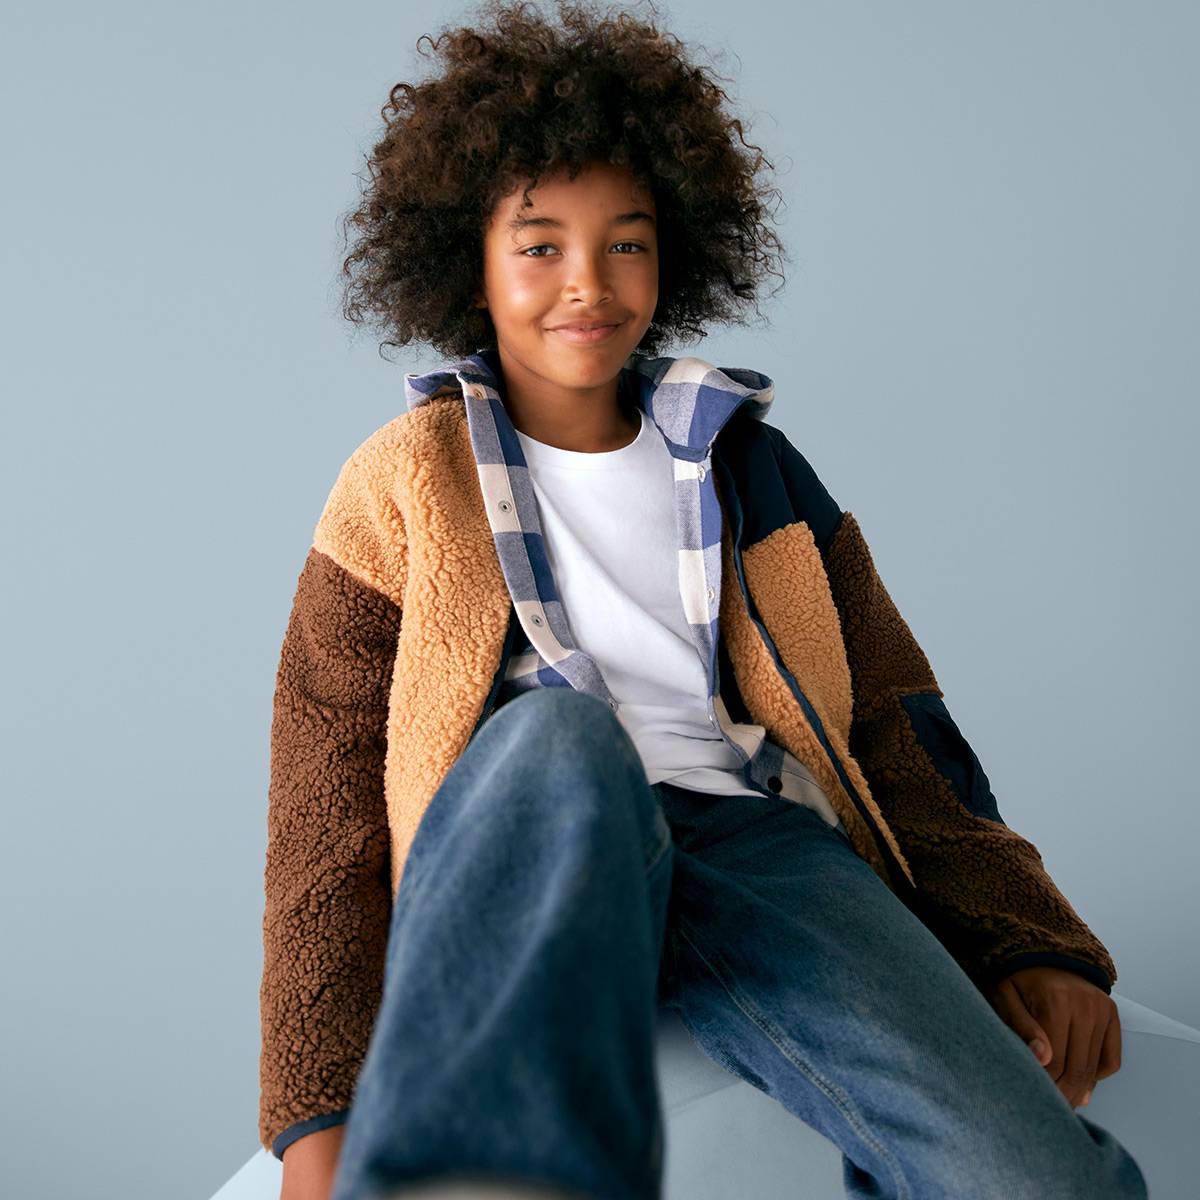 Boy wearing brown jacket, white T-shirt and jeans